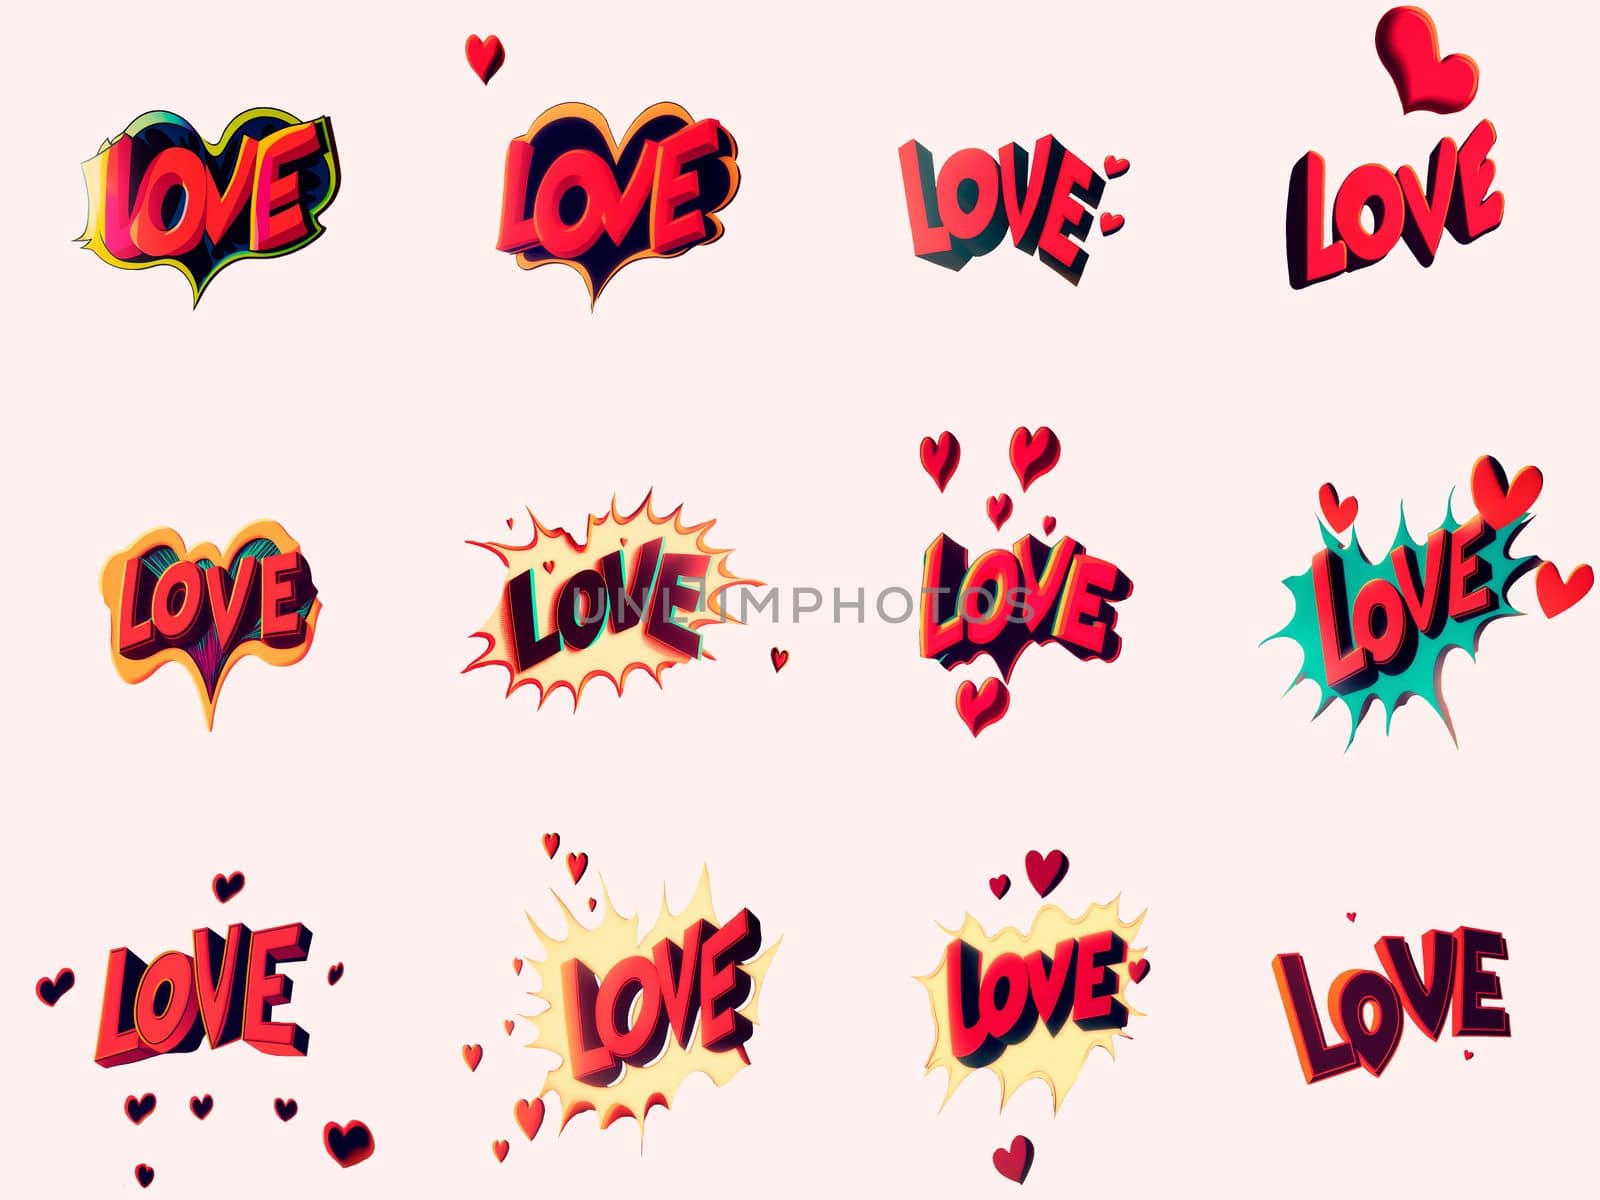 A set of icons with the word Love by NeuroSky